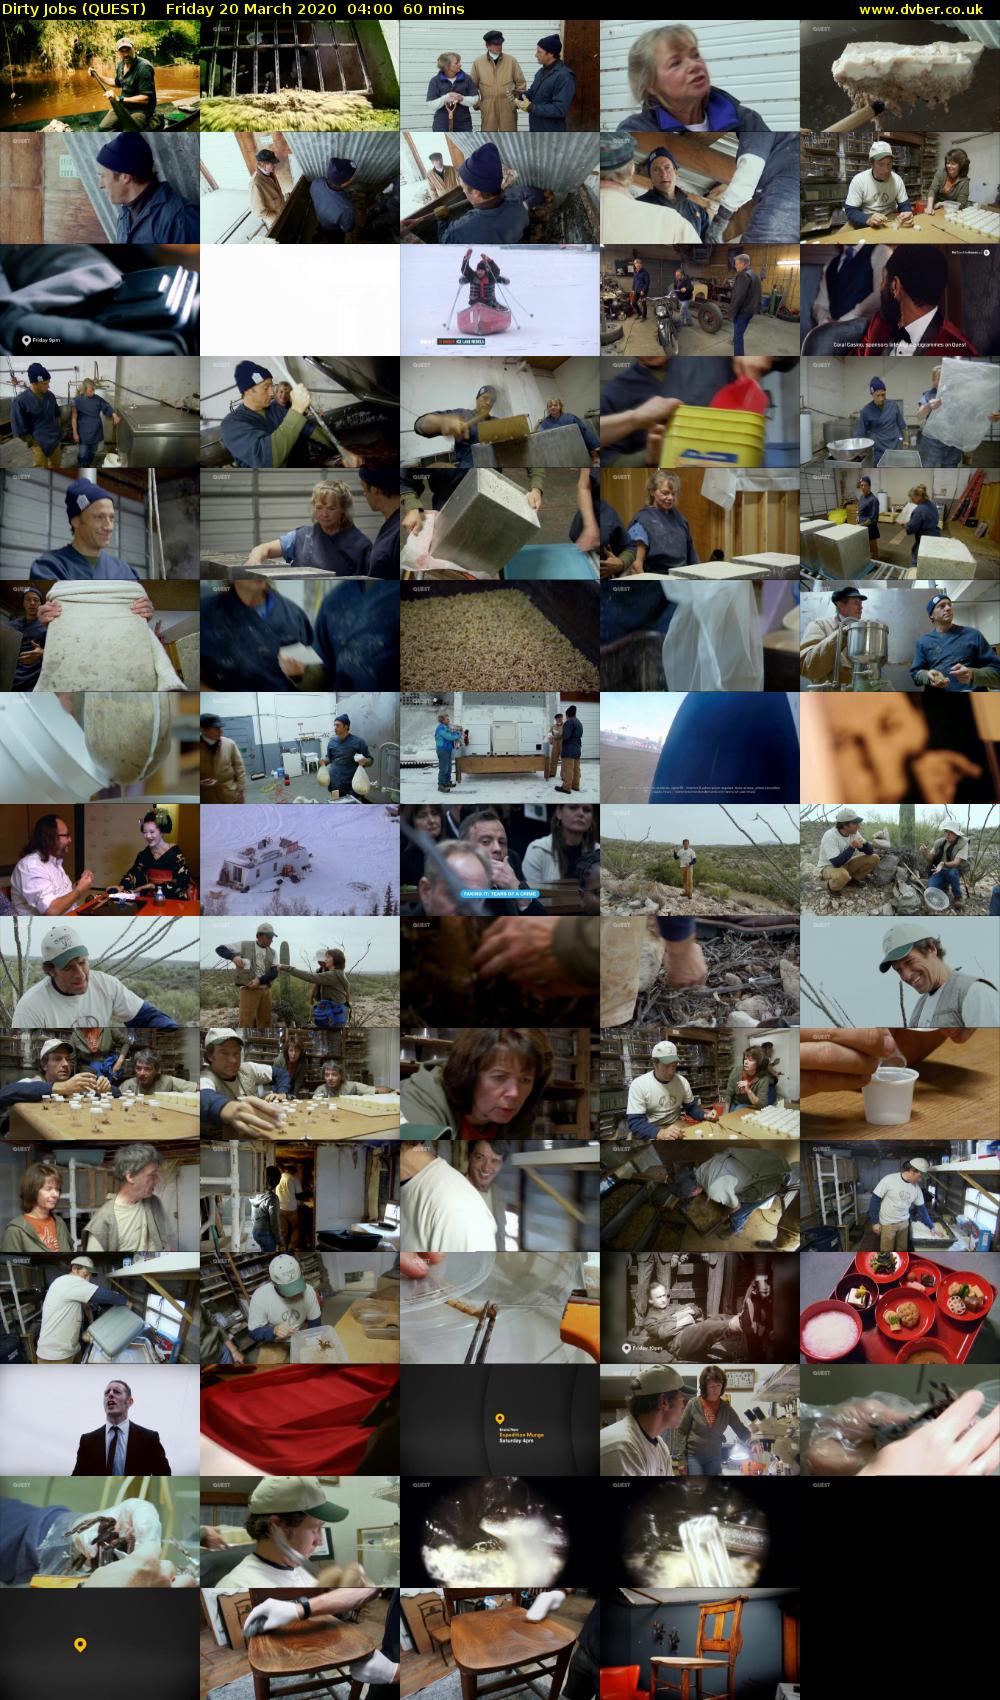 Dirty Jobs (QUEST) Friday 20 March 2020 04:00 - 05:00